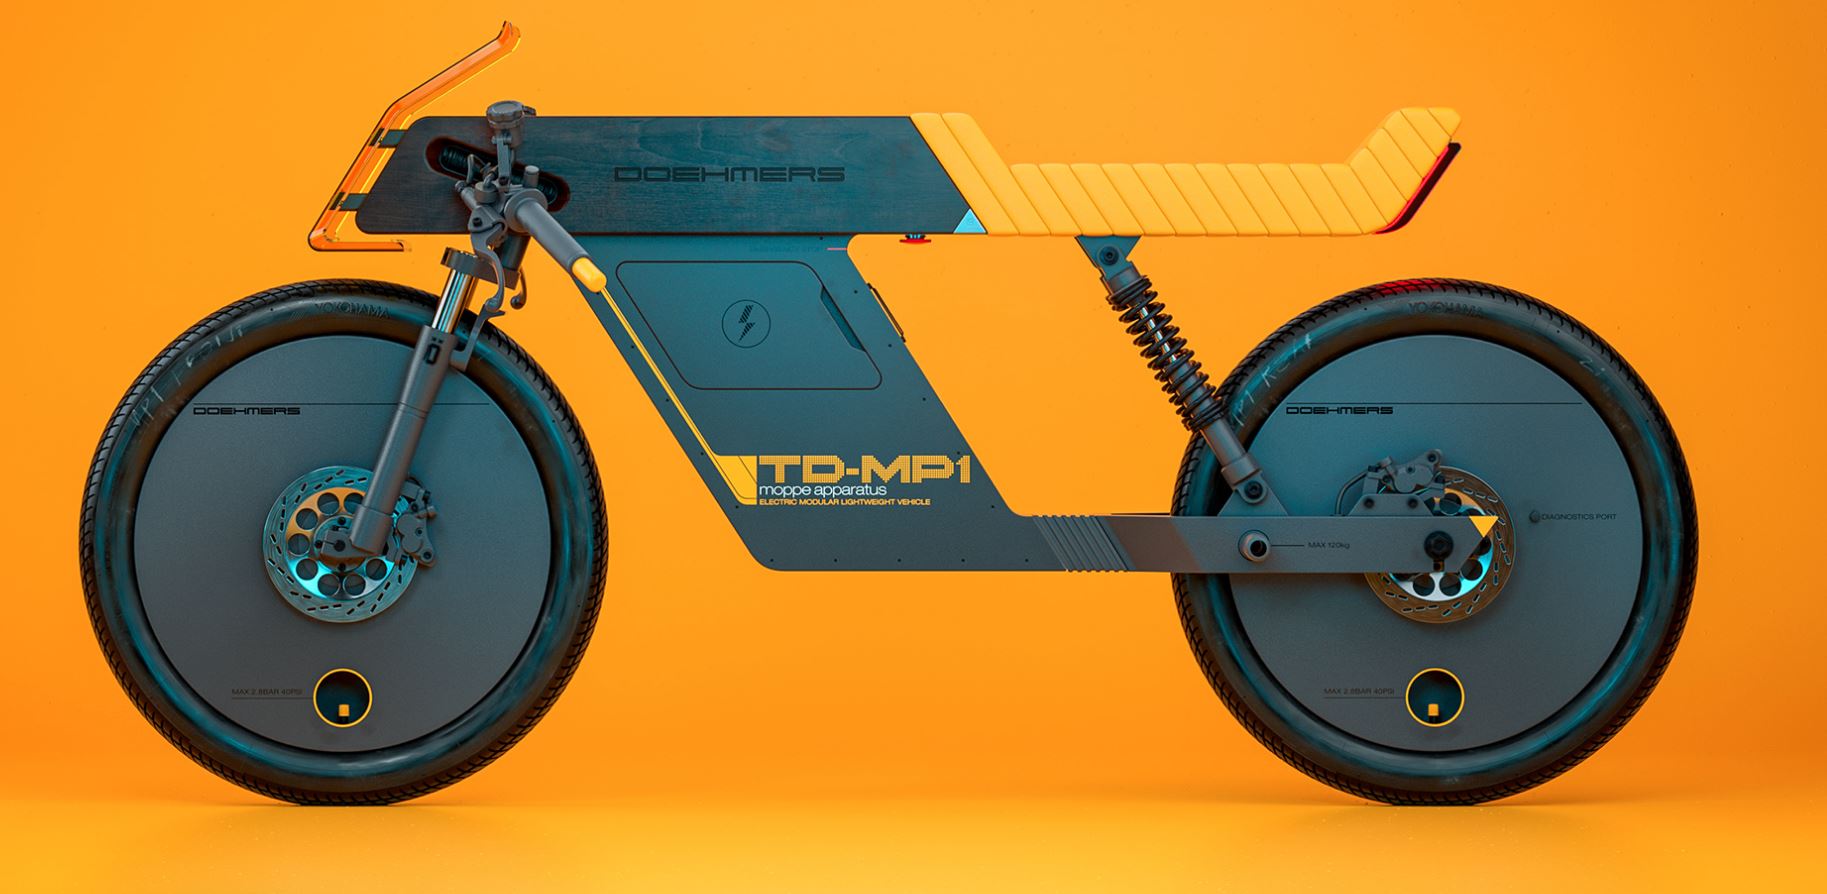 Doehmers' Moppe Apparatus TD-MP1 Is a Gorgeous Piece of Rideable